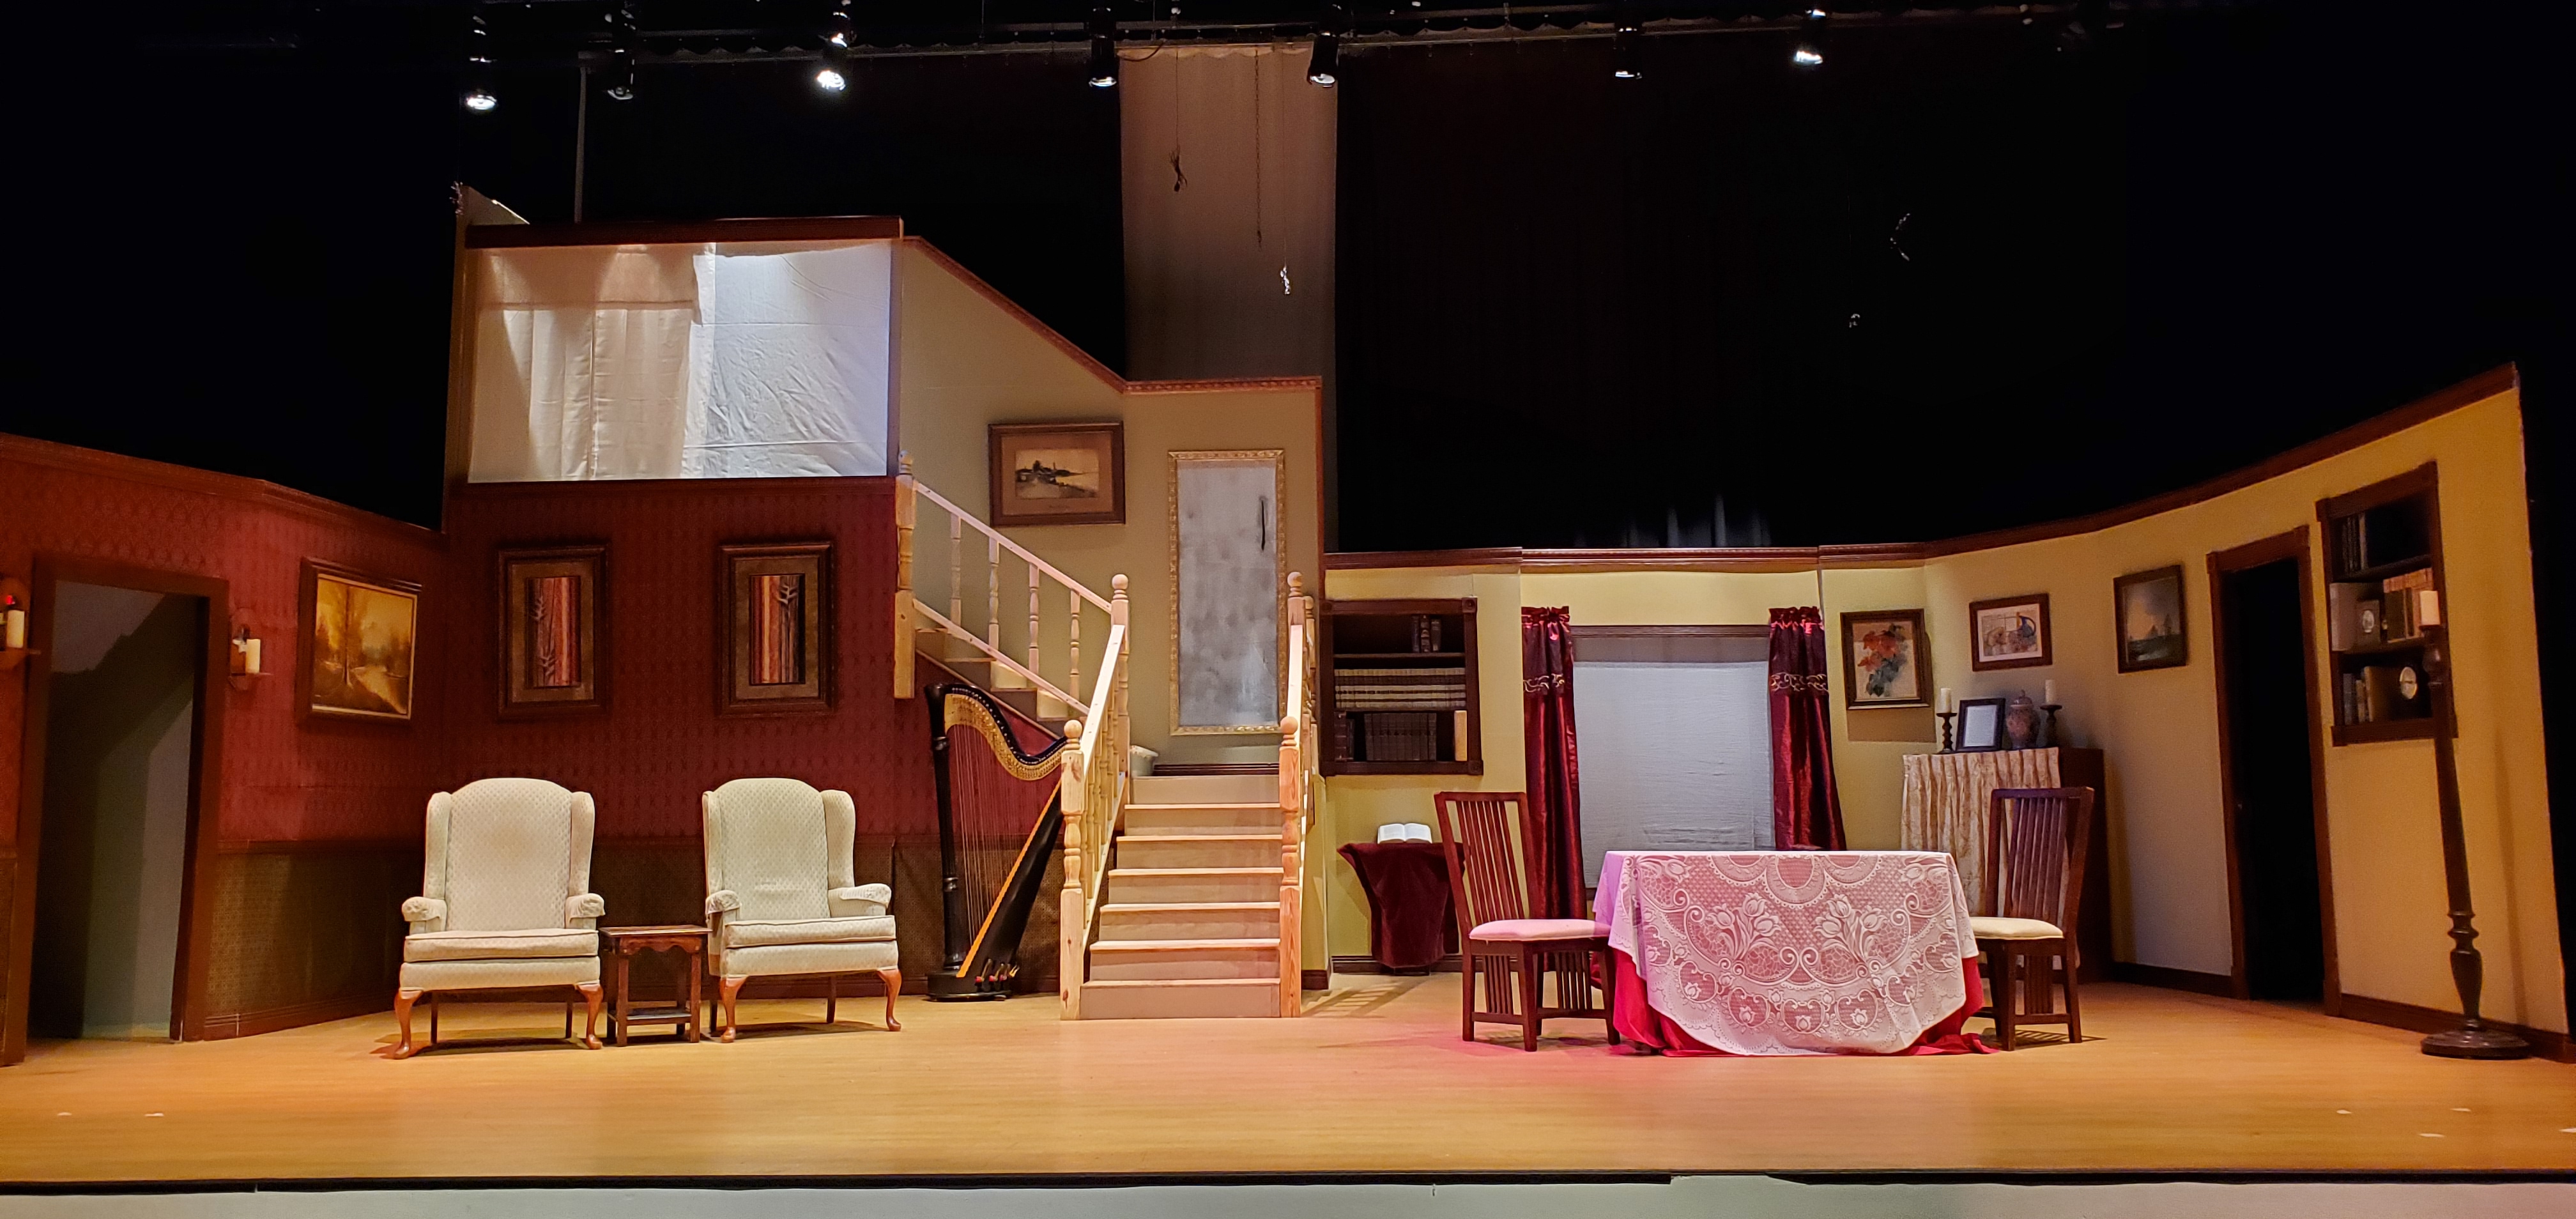 A theater set with reddish brown walls on the left and light brown walls on the right, and a set of stairs just to the left of center. The stairs turn
       left at a landing and go up again. A harp sits near the stairs. Two beige chairs sit to the left and a table and two chairs sit toward the right. There is a
       large window with red drapes toward the back on the right. There are doorways to the left and right.